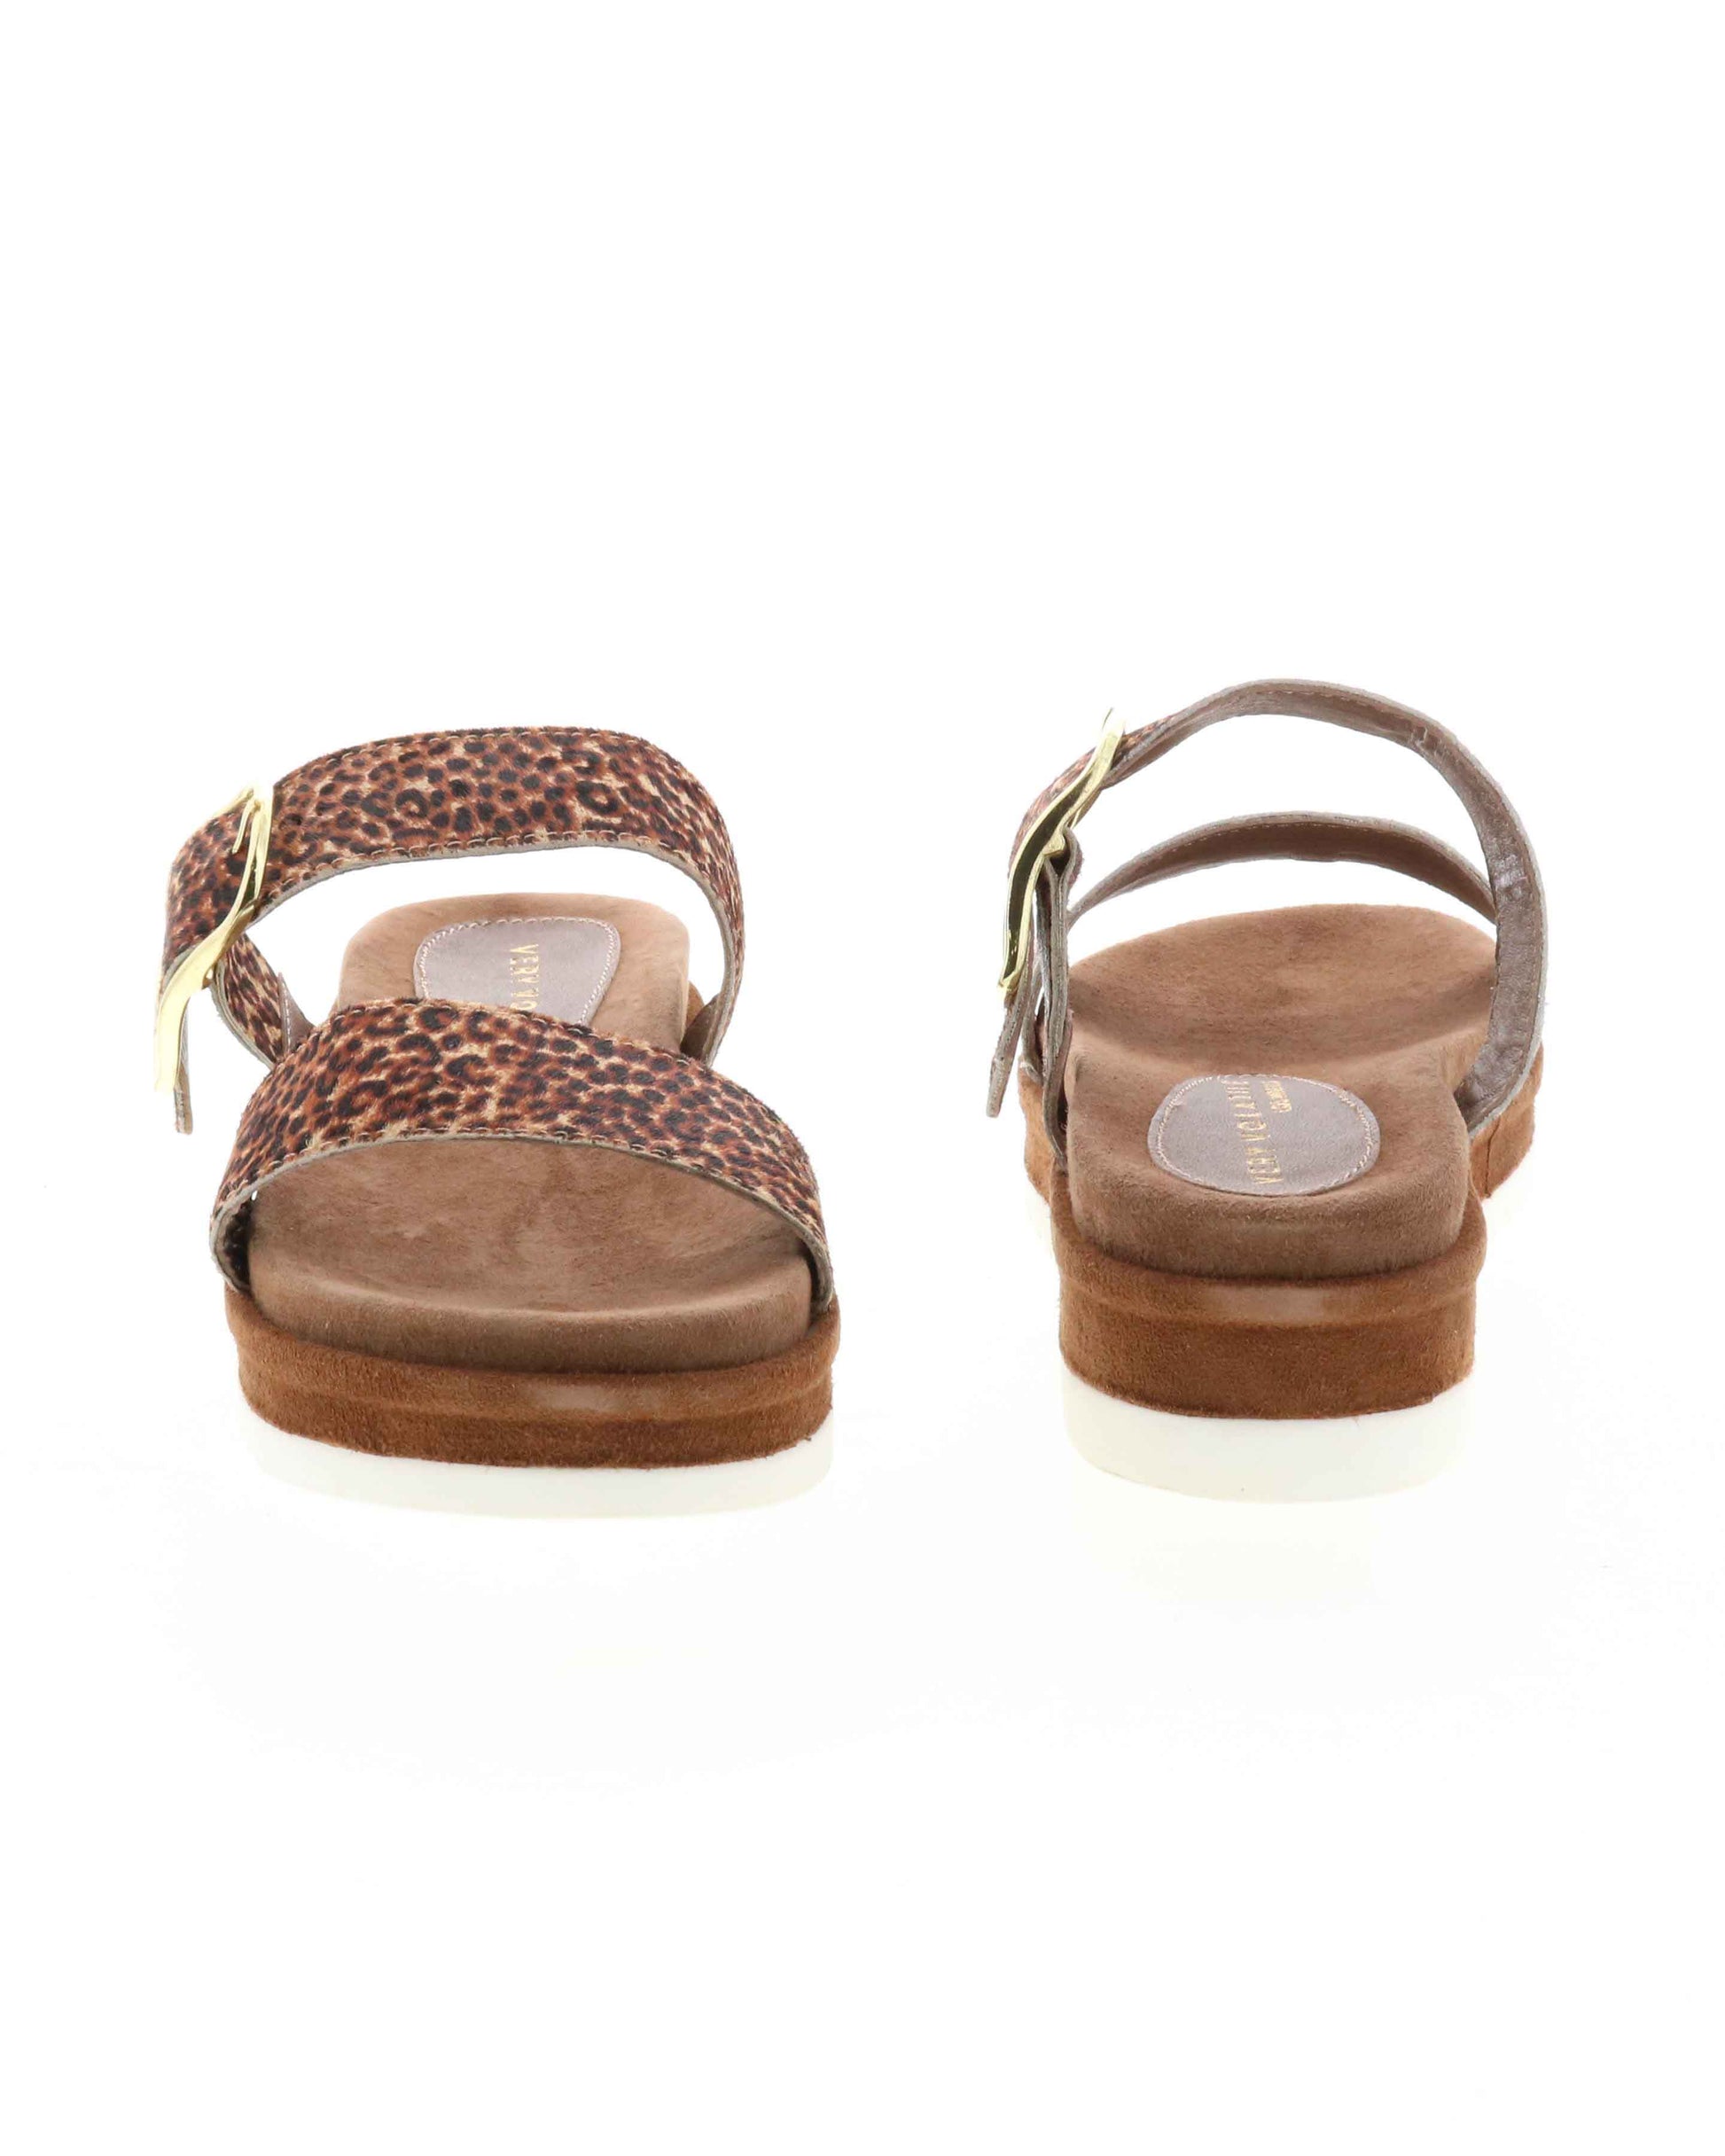 DOUBLE STRAP MINI FLATFORM SANDAL - Genuine calf-hair upper - Leather lining - Adjustable metal buckle - Two band slip-on sandal style - Anatomic suede covered footbed - Suede covered low platform bottom - White ridged outsole - Approx. 1.5" heel height tan leopard front and back